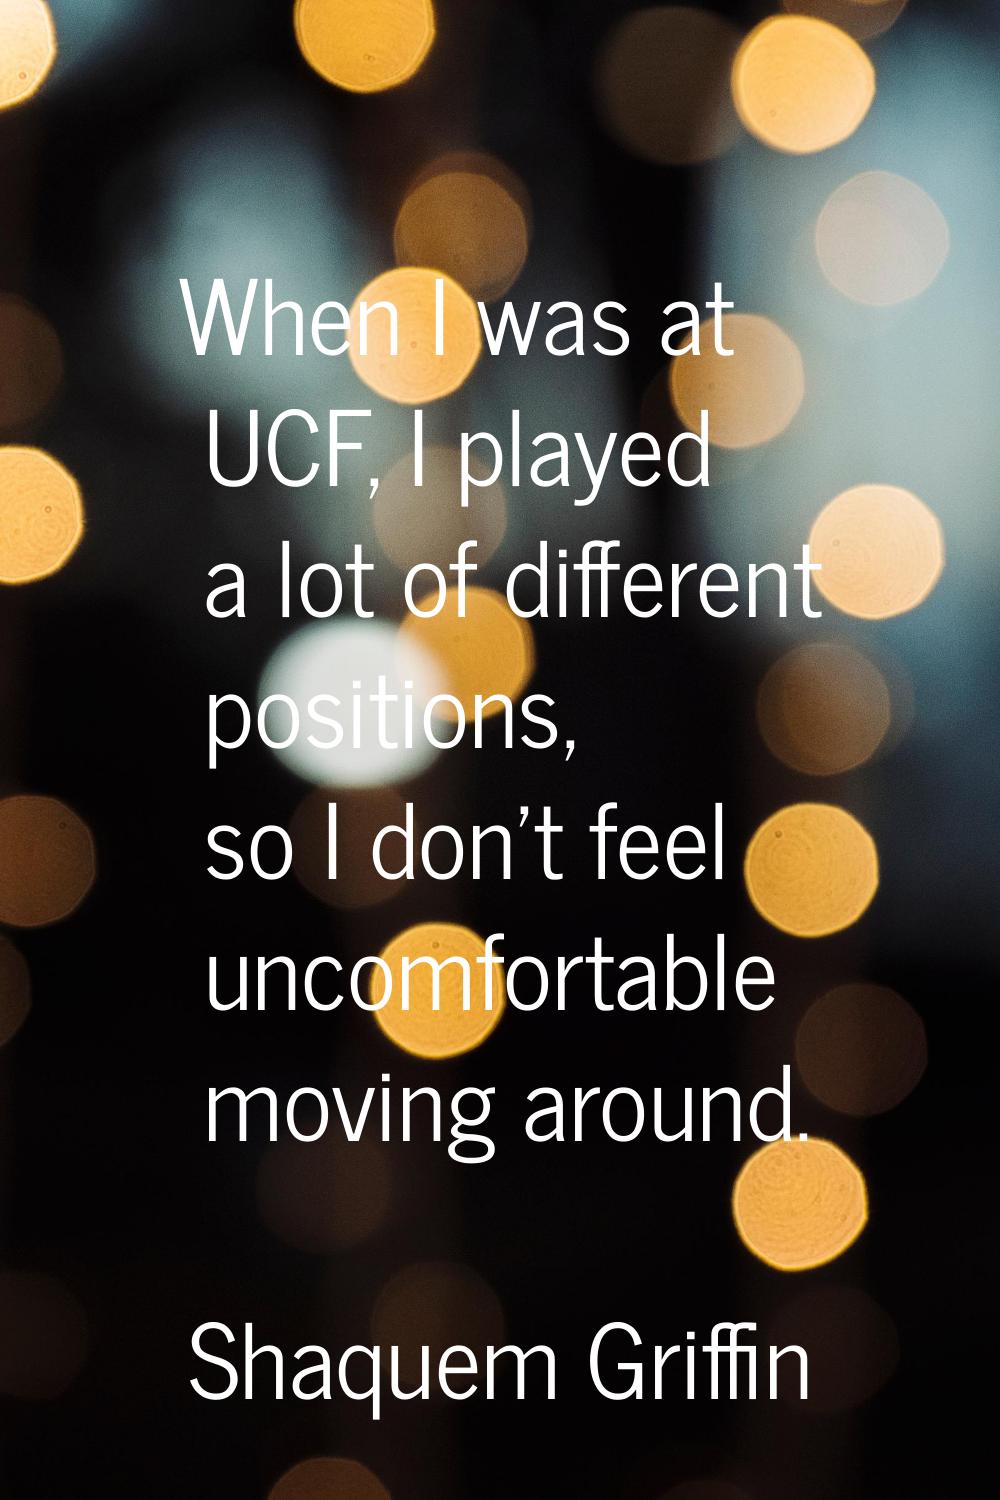 When I was at UCF, I played a lot of different positions, so I don't feel uncomfortable moving arou